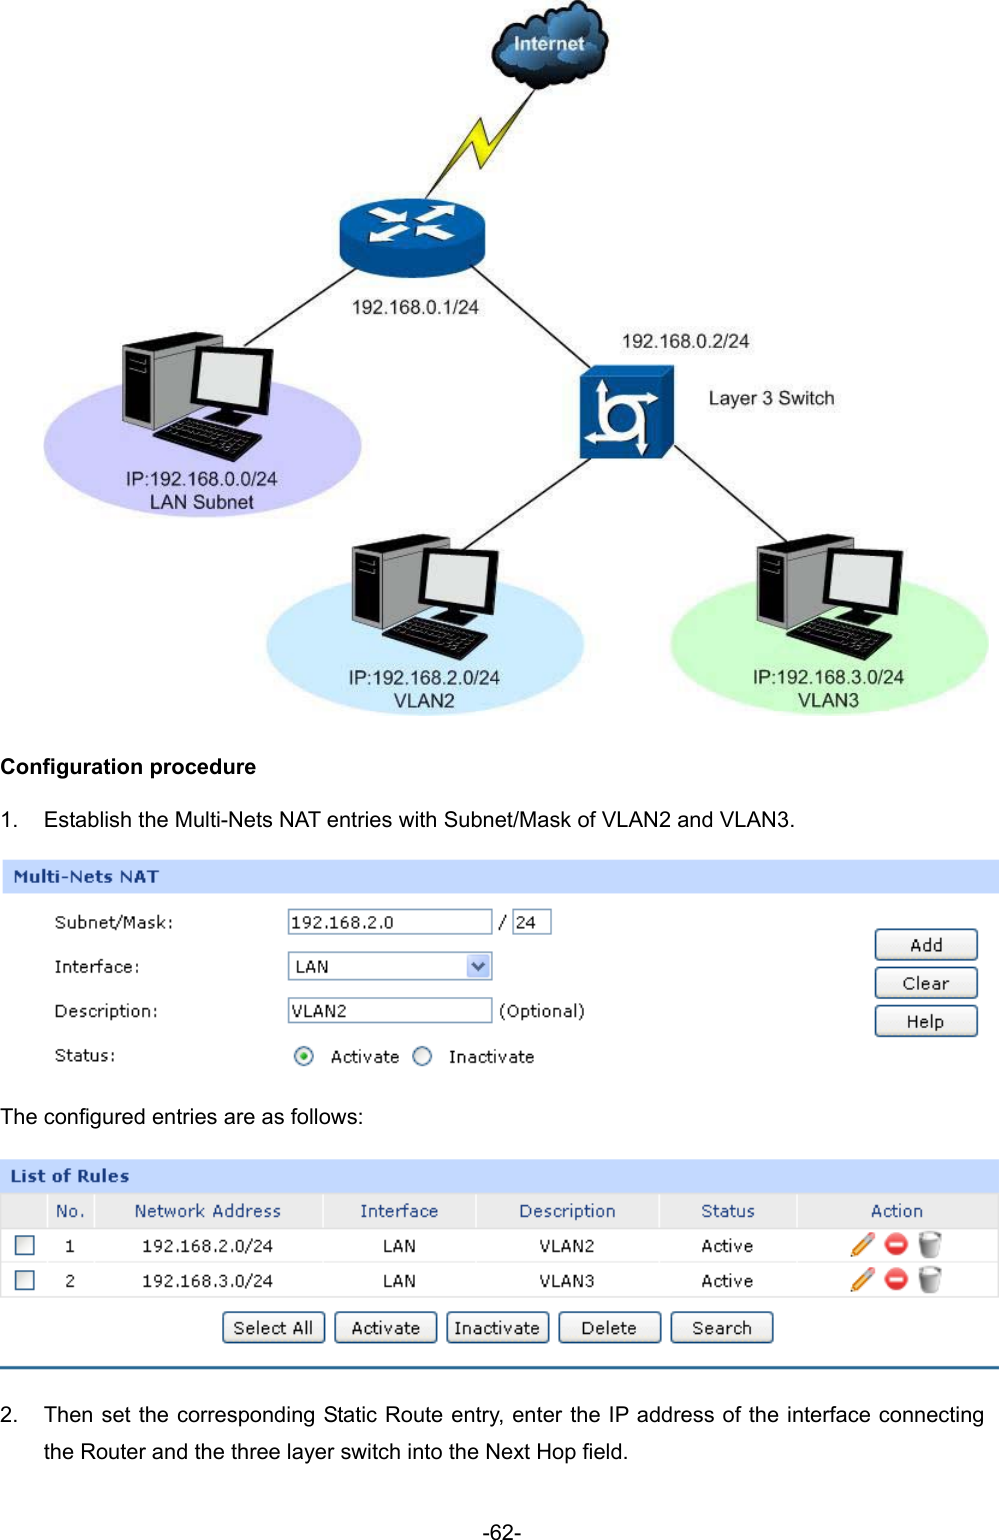  -62-  Configuration procedure 1.  Establish the Multi-Nets NAT entries with Subnet/Mask of VLAN2 and VLAN3.  The configured entries are as follows:  2.  Then set the corresponding Static Route entry, enter the IP address of the interface connecting the Router and the three layer switch into the Next Hop field.   